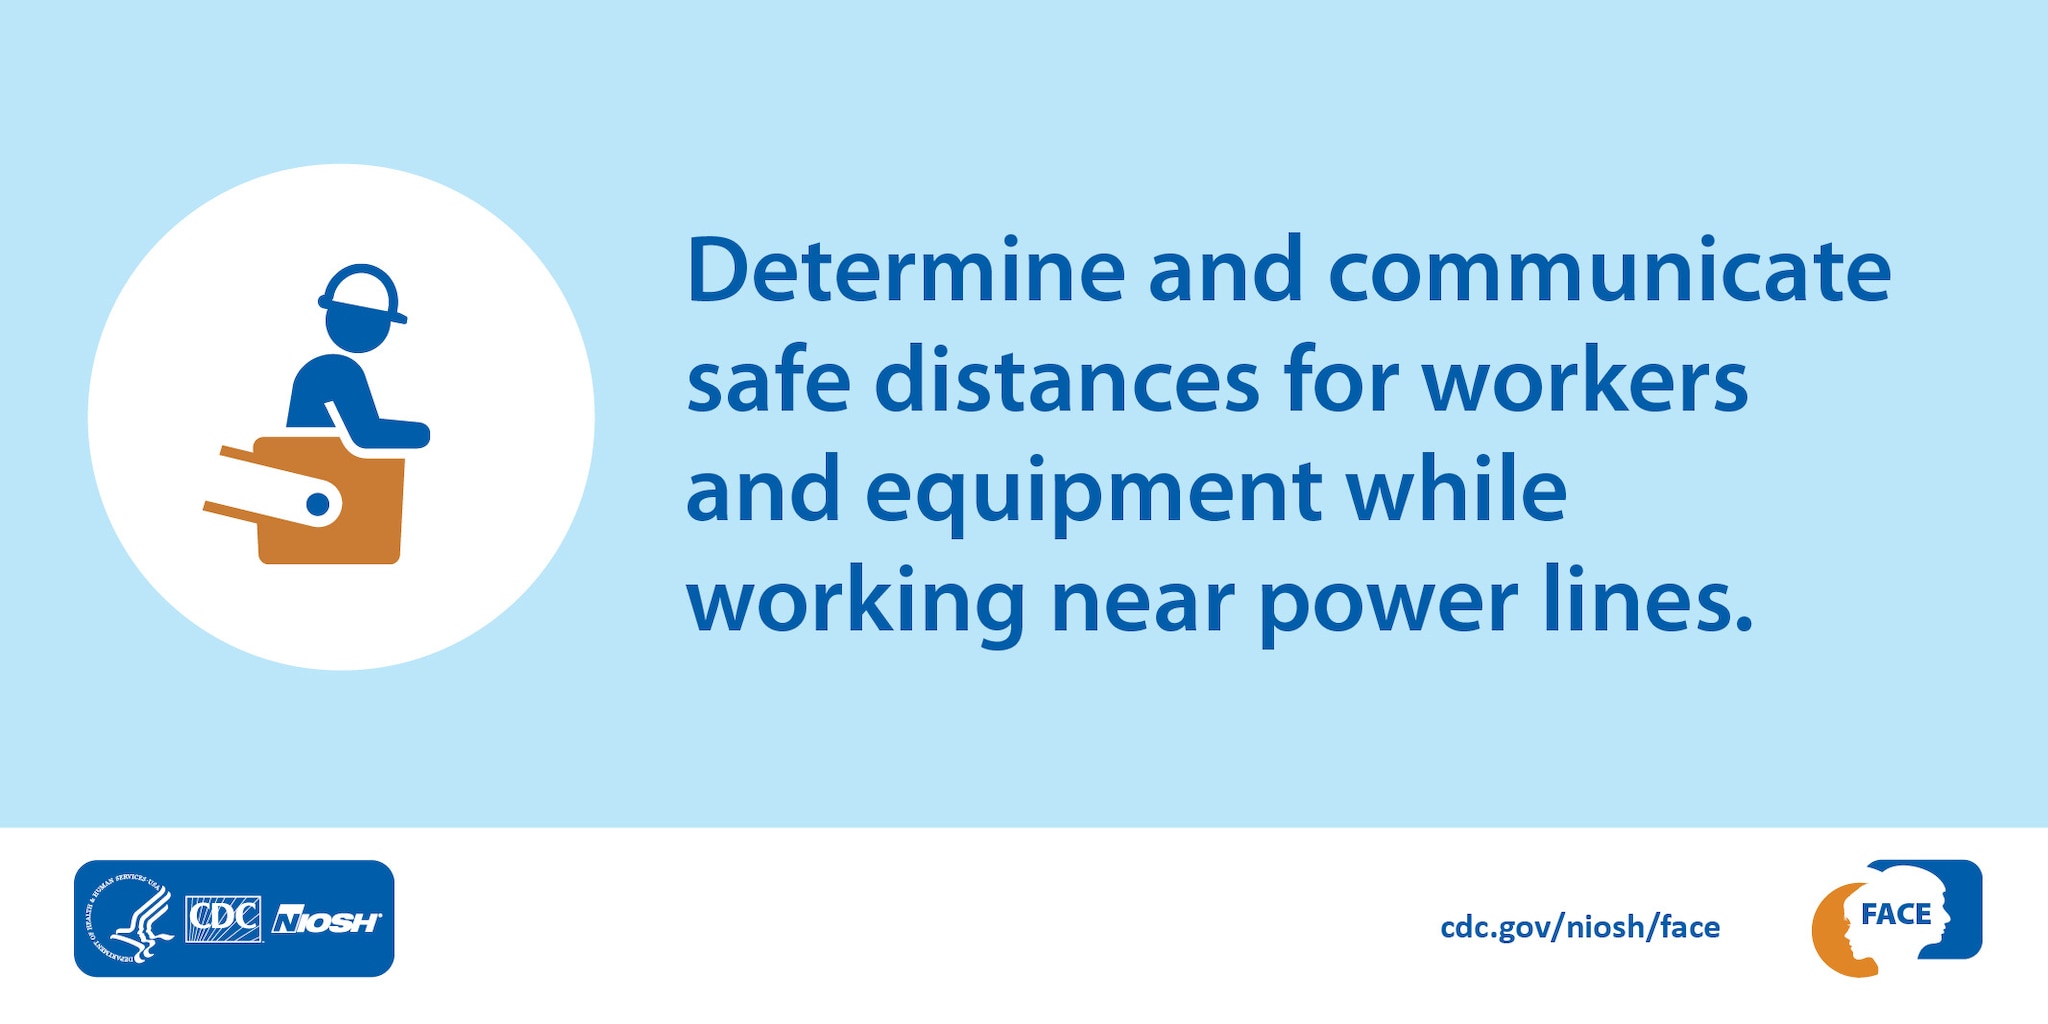 Determine and communicate safe distances for workers and equipment while working near power lines.